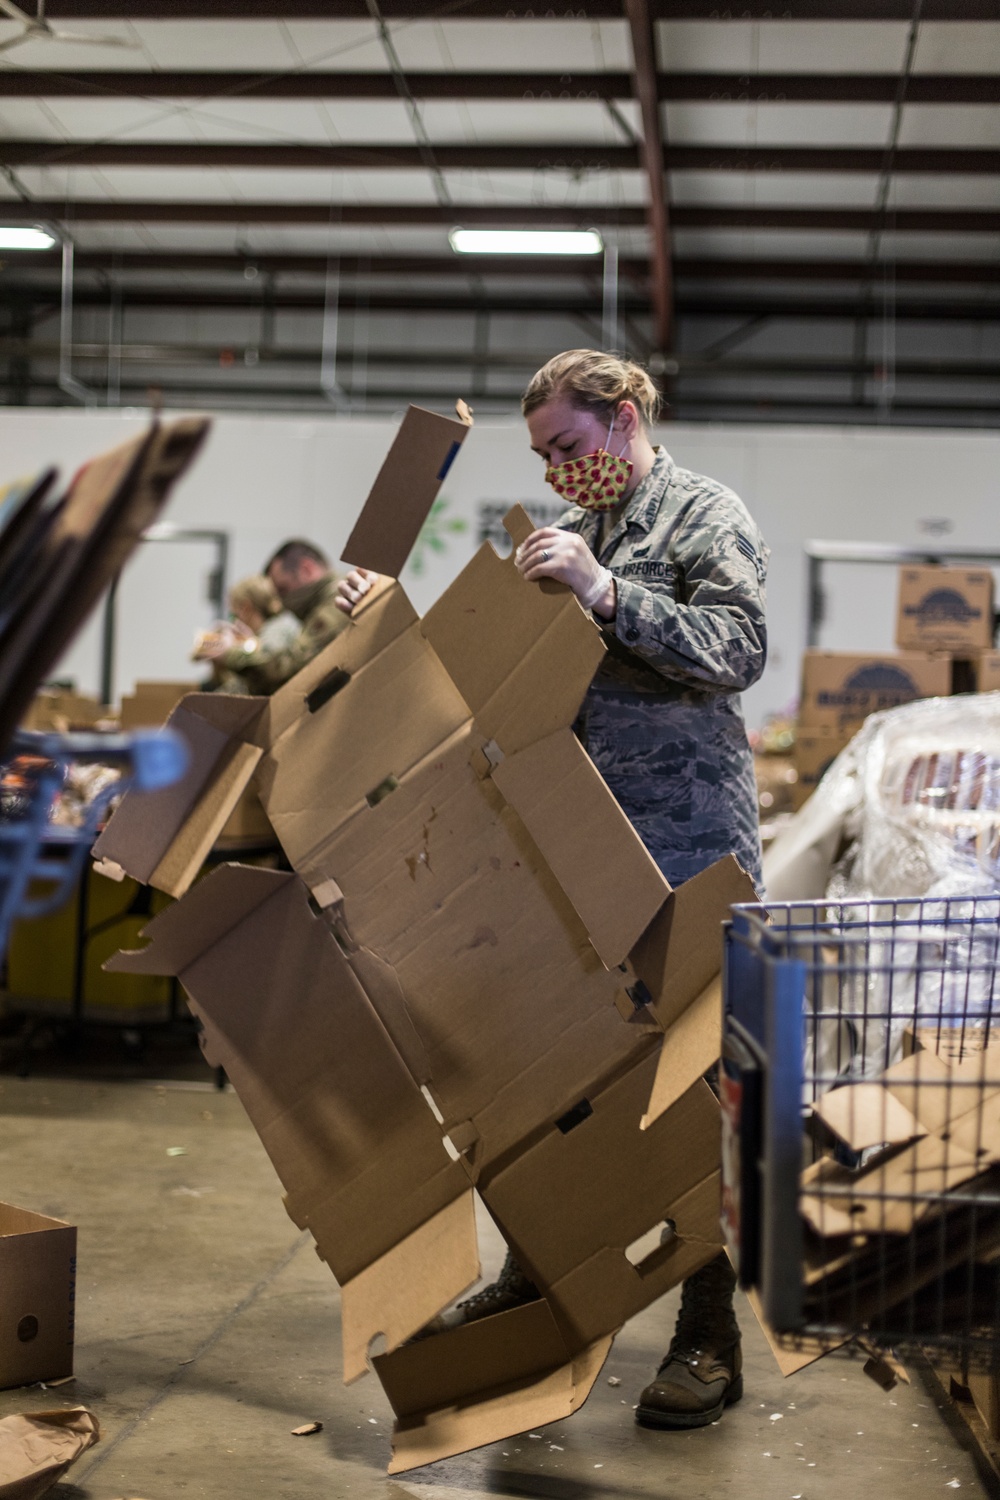 110th Wing packages food at the South Michigan Food Bank during COVID-19 response